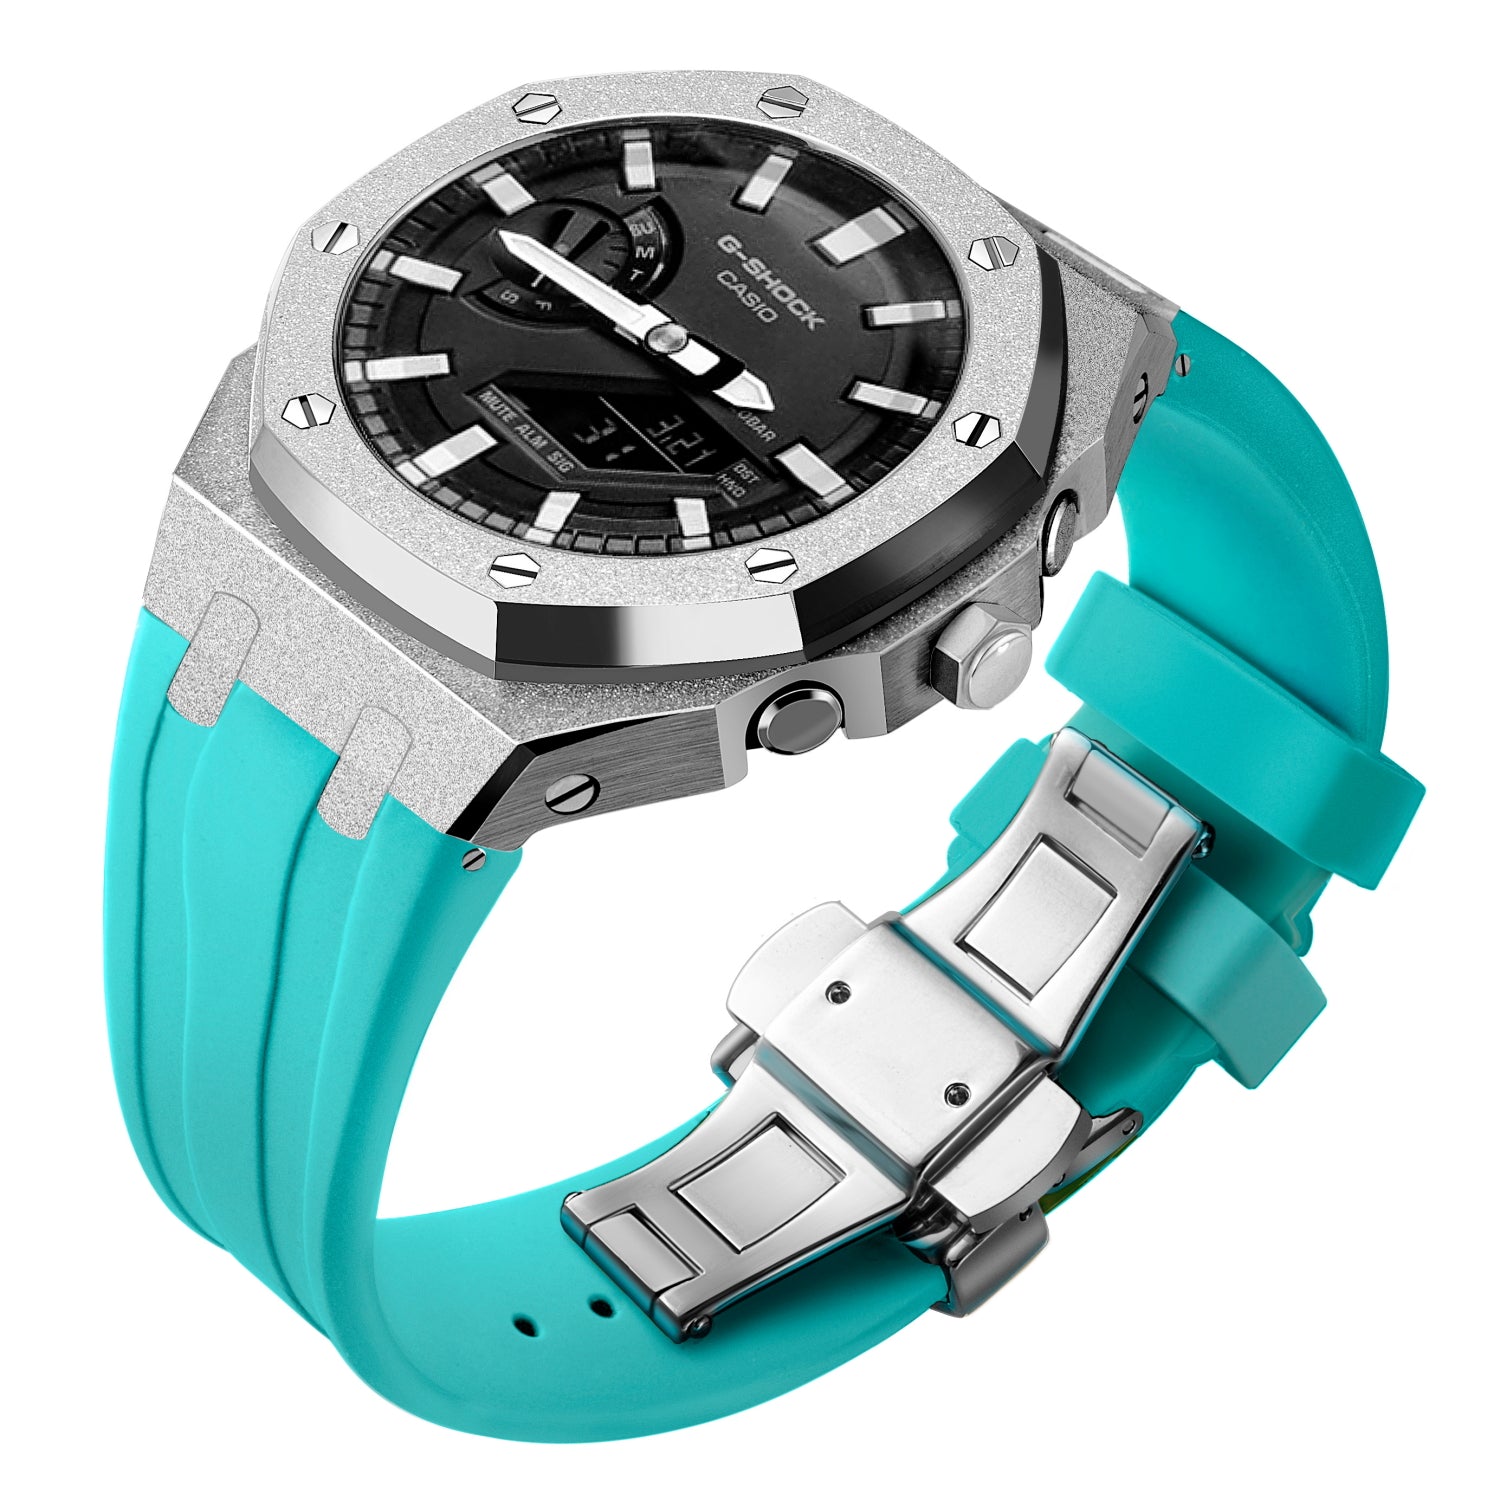 Luxury stainless steel case with Silicone strap for G-Shock GA2100【Shiny surface】 - CIVIBUY